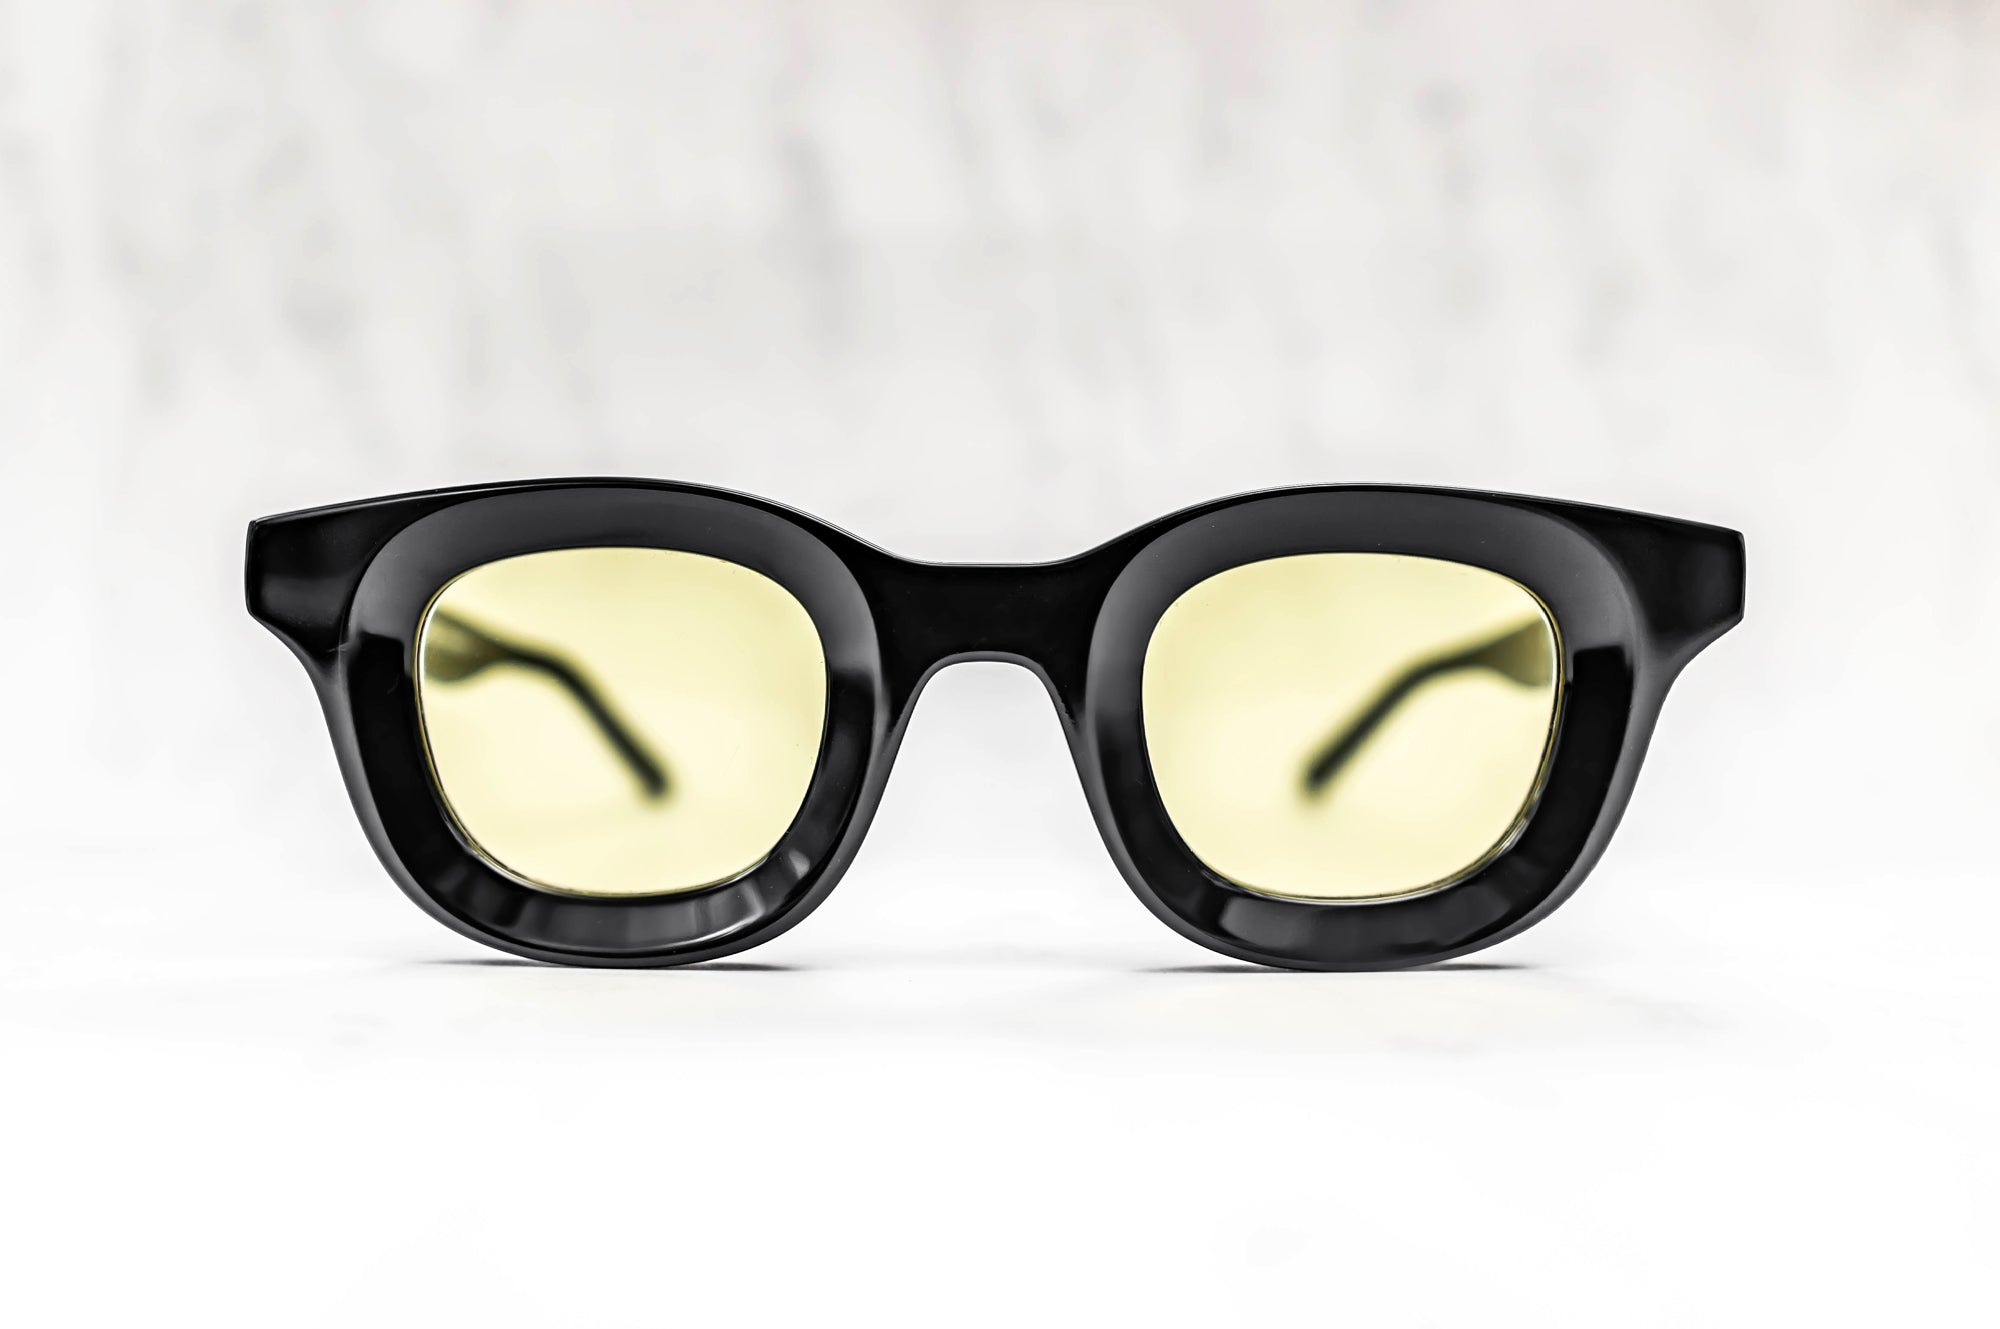 RHUDE x Thierry Lasry - Rhodeo Sunglasses in Black w/ Yellow Lenses (101)